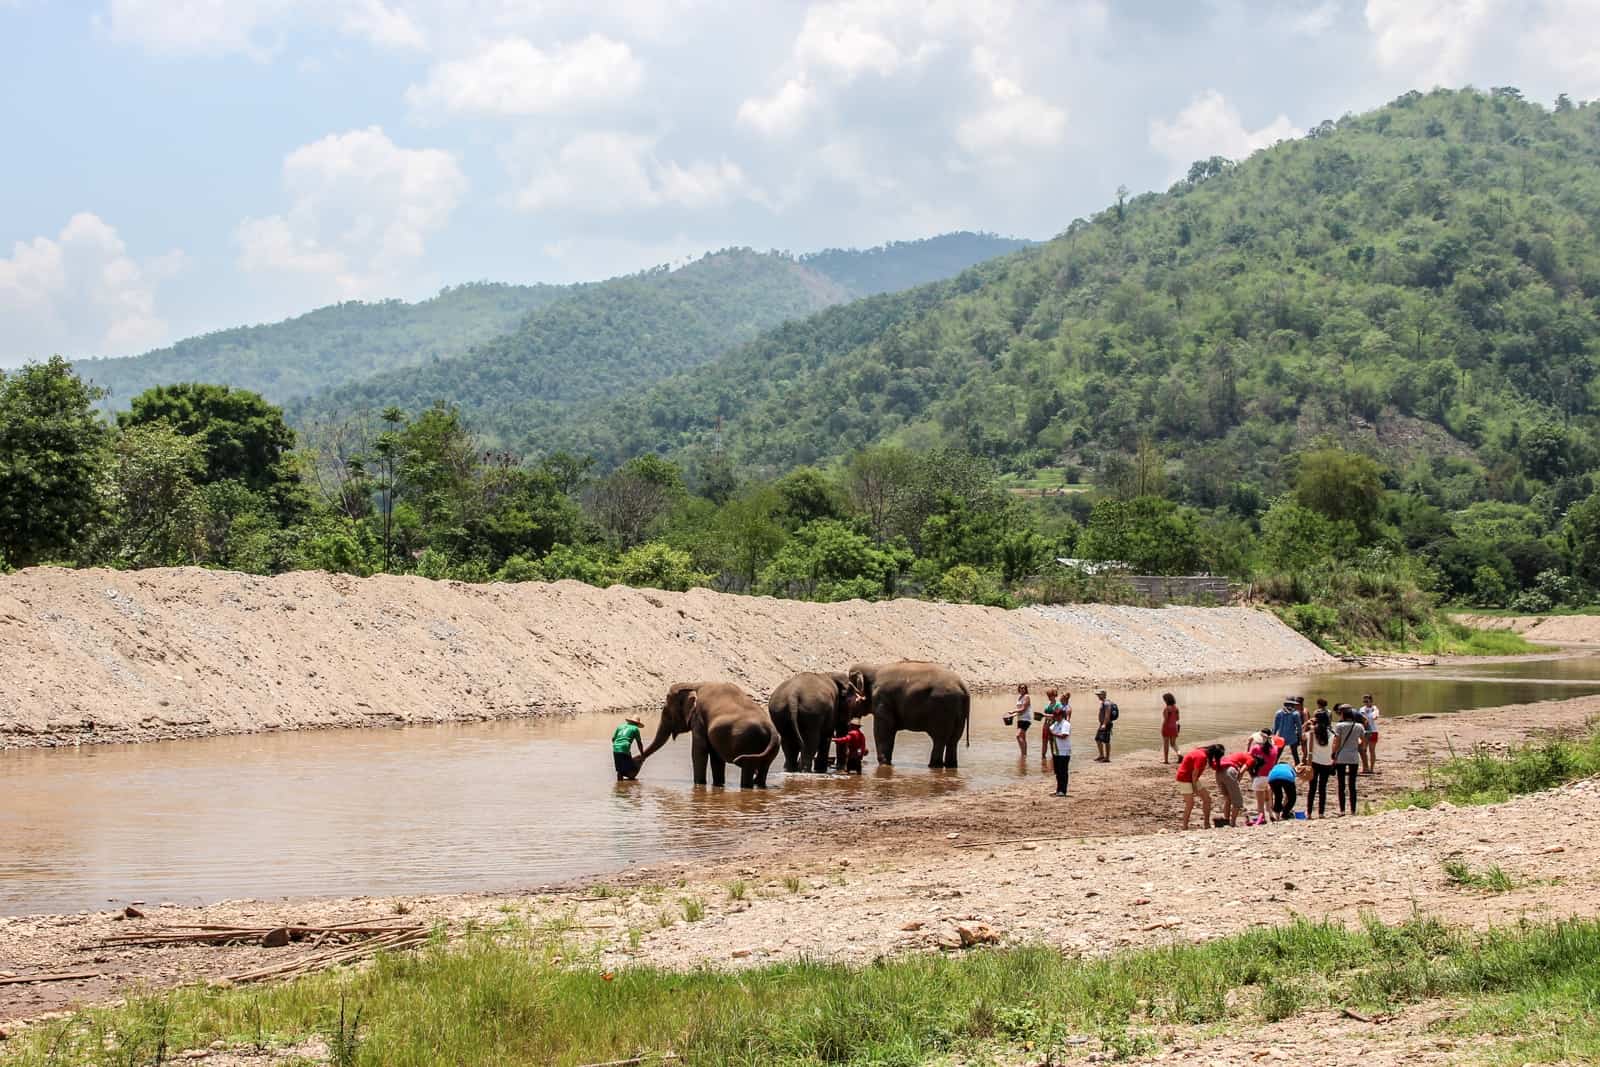 A group of tourists bathing elephants without riding them at the Elephant Nature Park in Chiang Mai, Thailand.